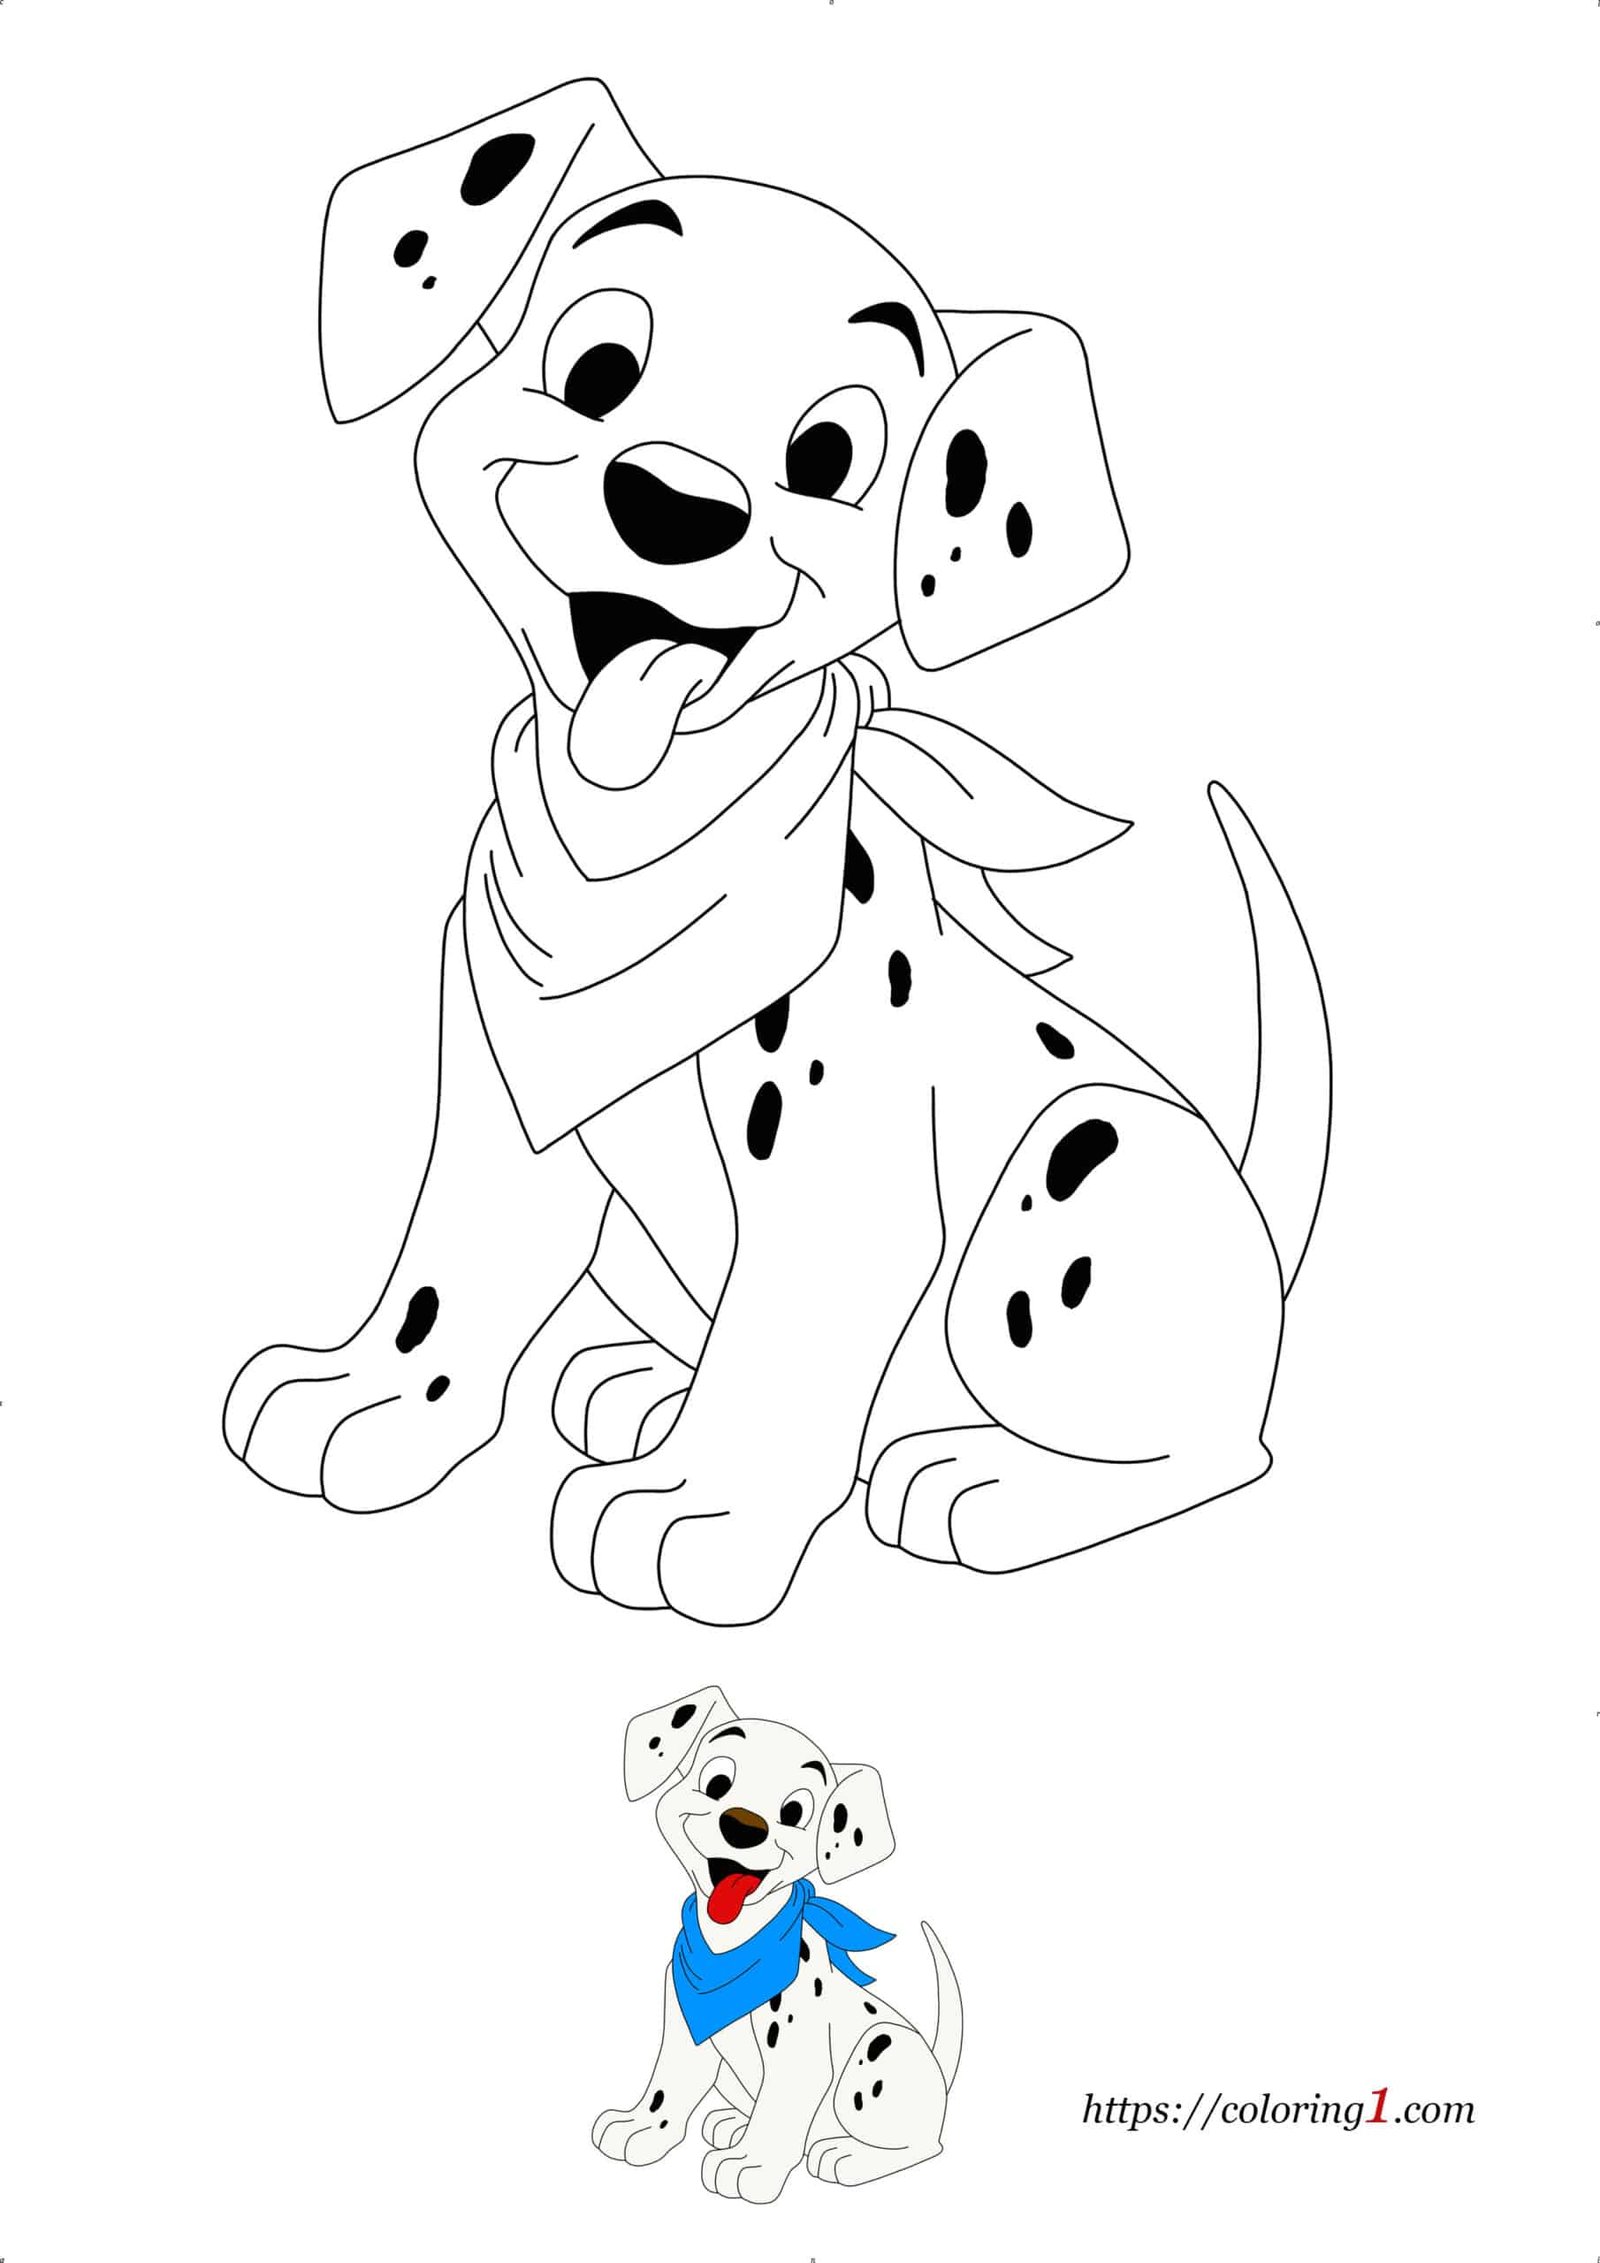 How to color Cartoon Dog coloring page